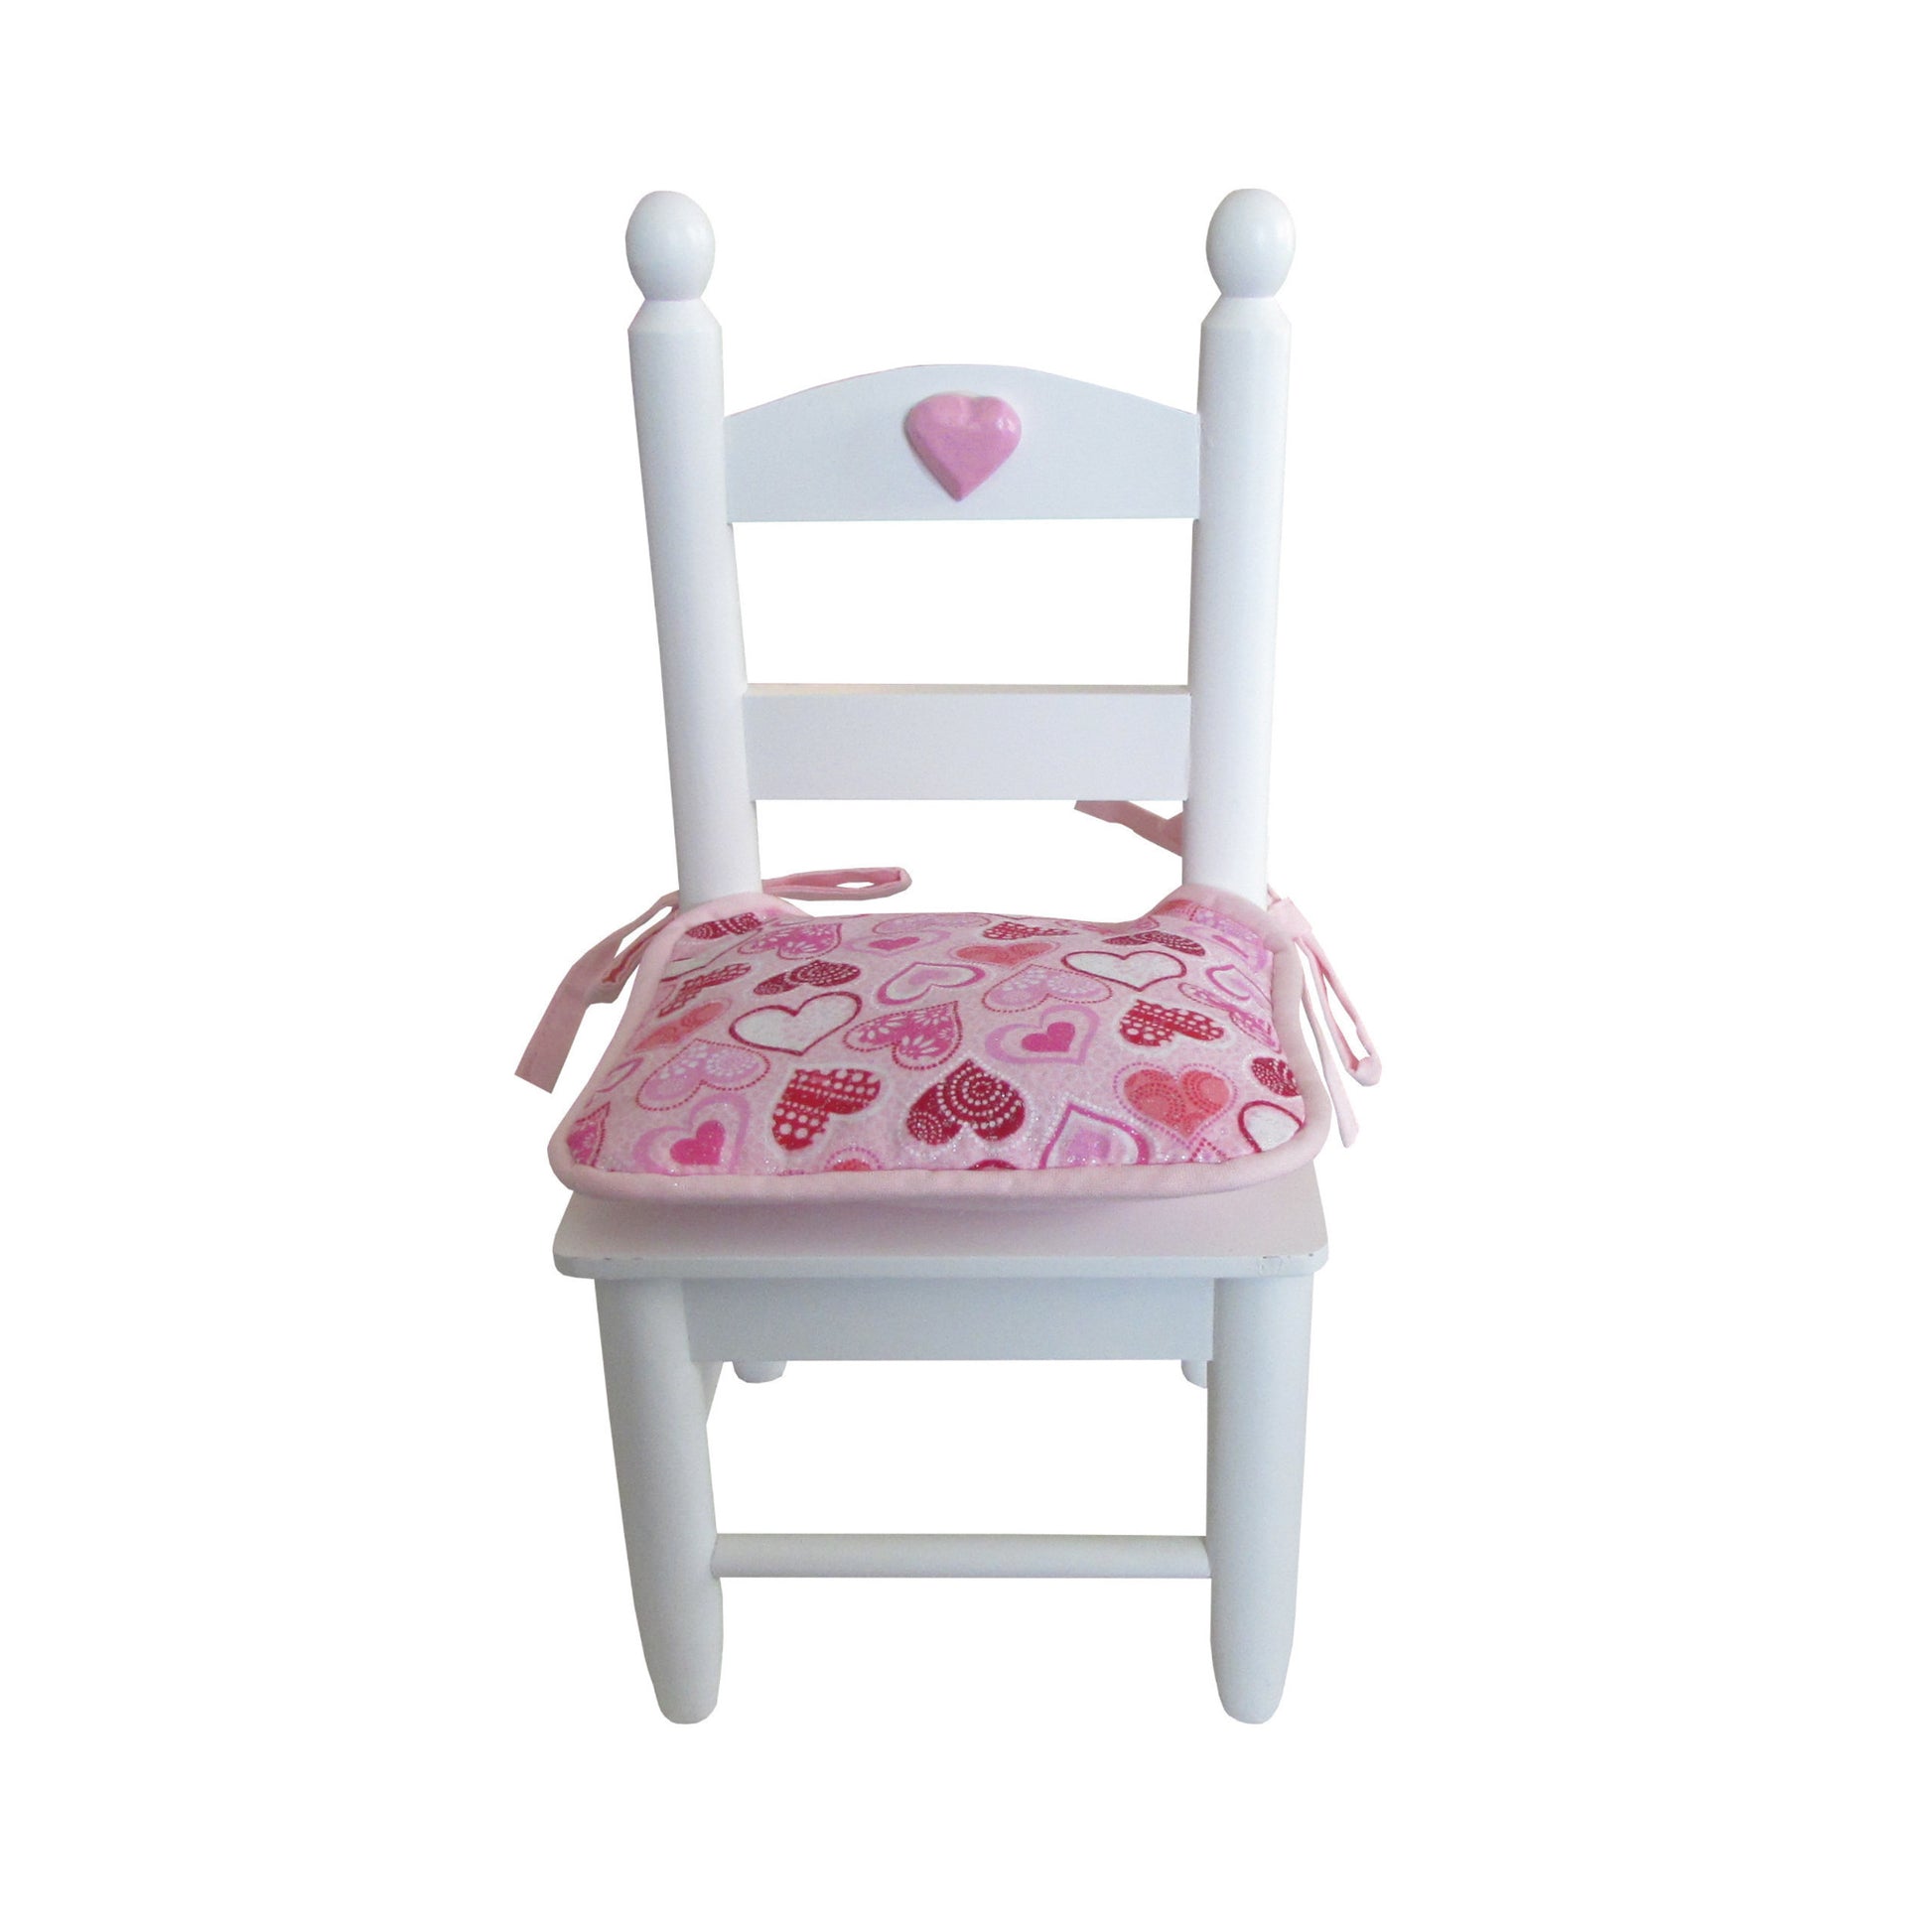 Pink and Red Hearts Doll Chair Cushion for 18-inch dolls